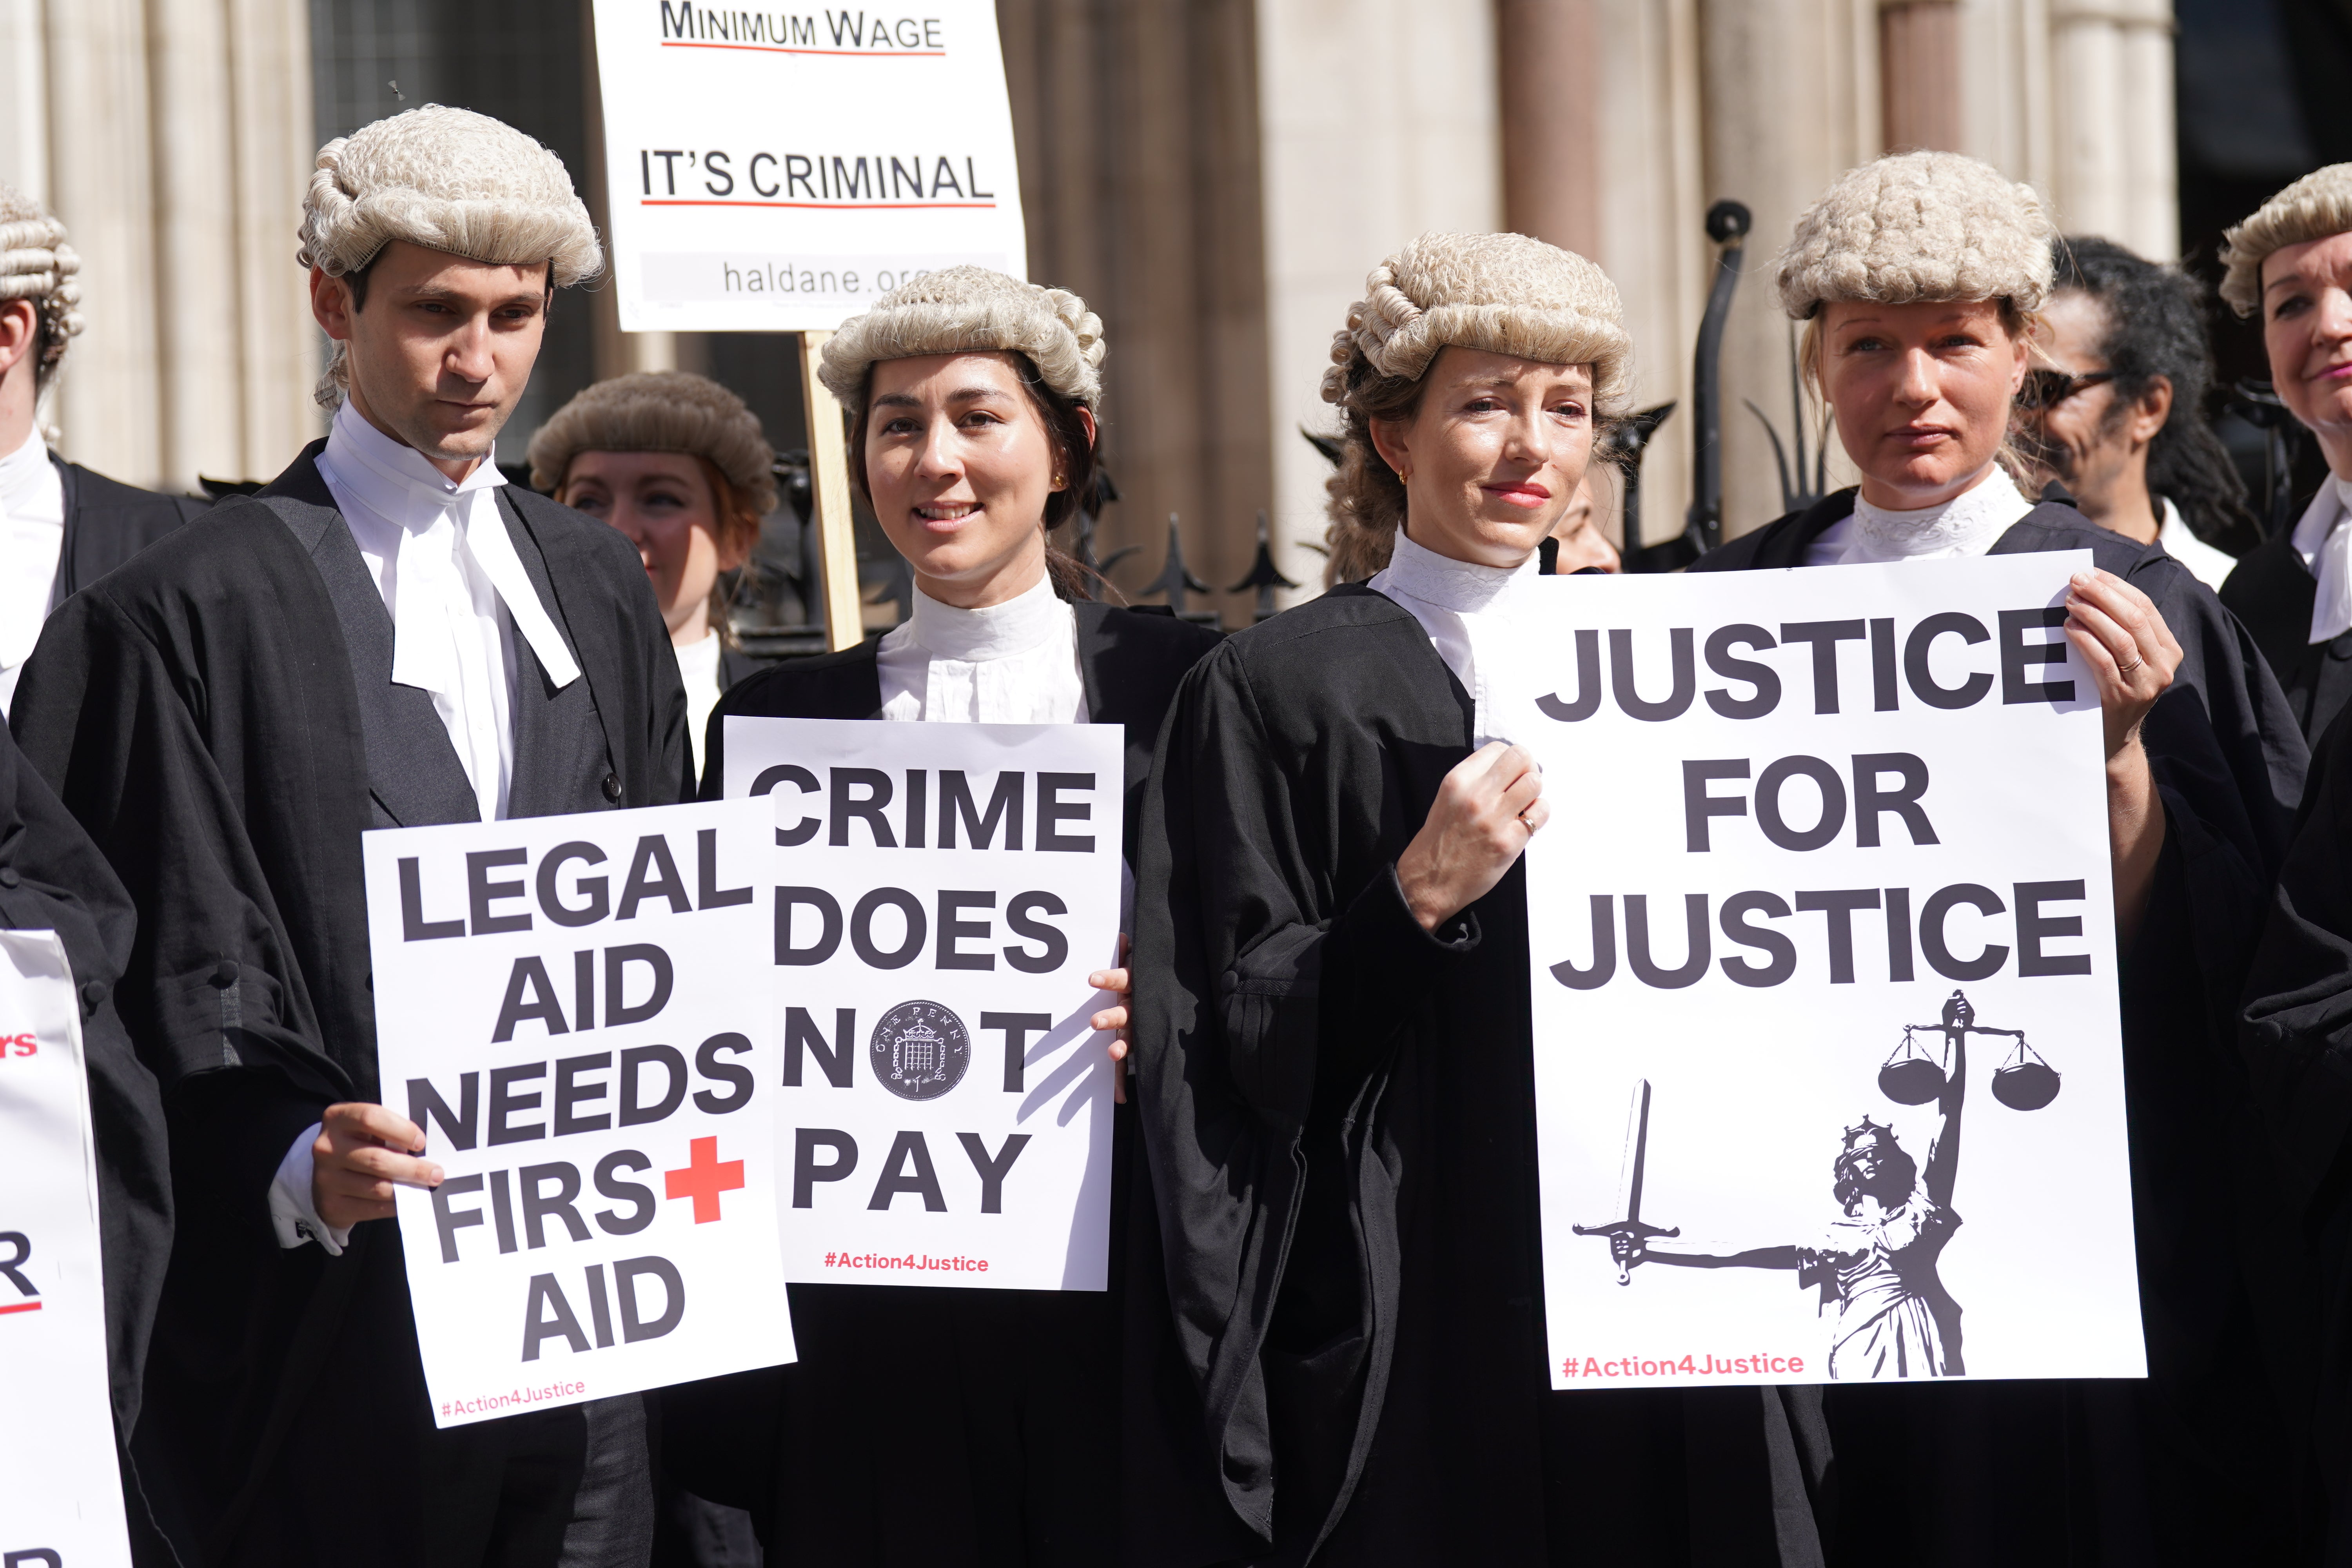 Criminal defence barristers gather outside the Royal Courts of Justice in London to support the ongoing Criminal Bar Association action over government-set fees for legal aid advocacy work